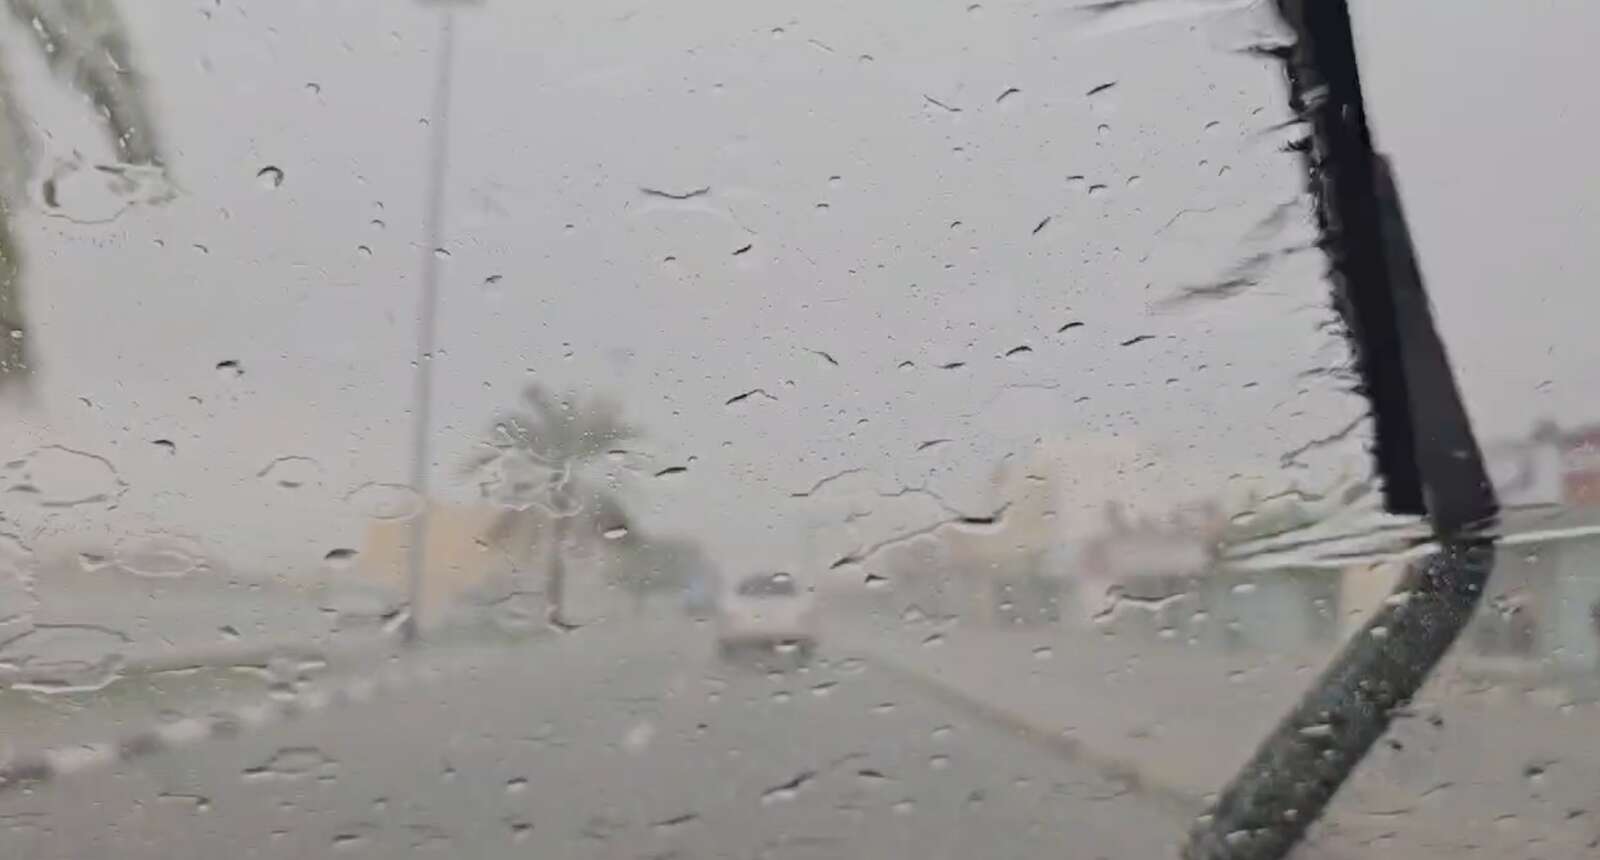 rains in uae: 61 families evacuated from their homes in sharjah, moved to hotels